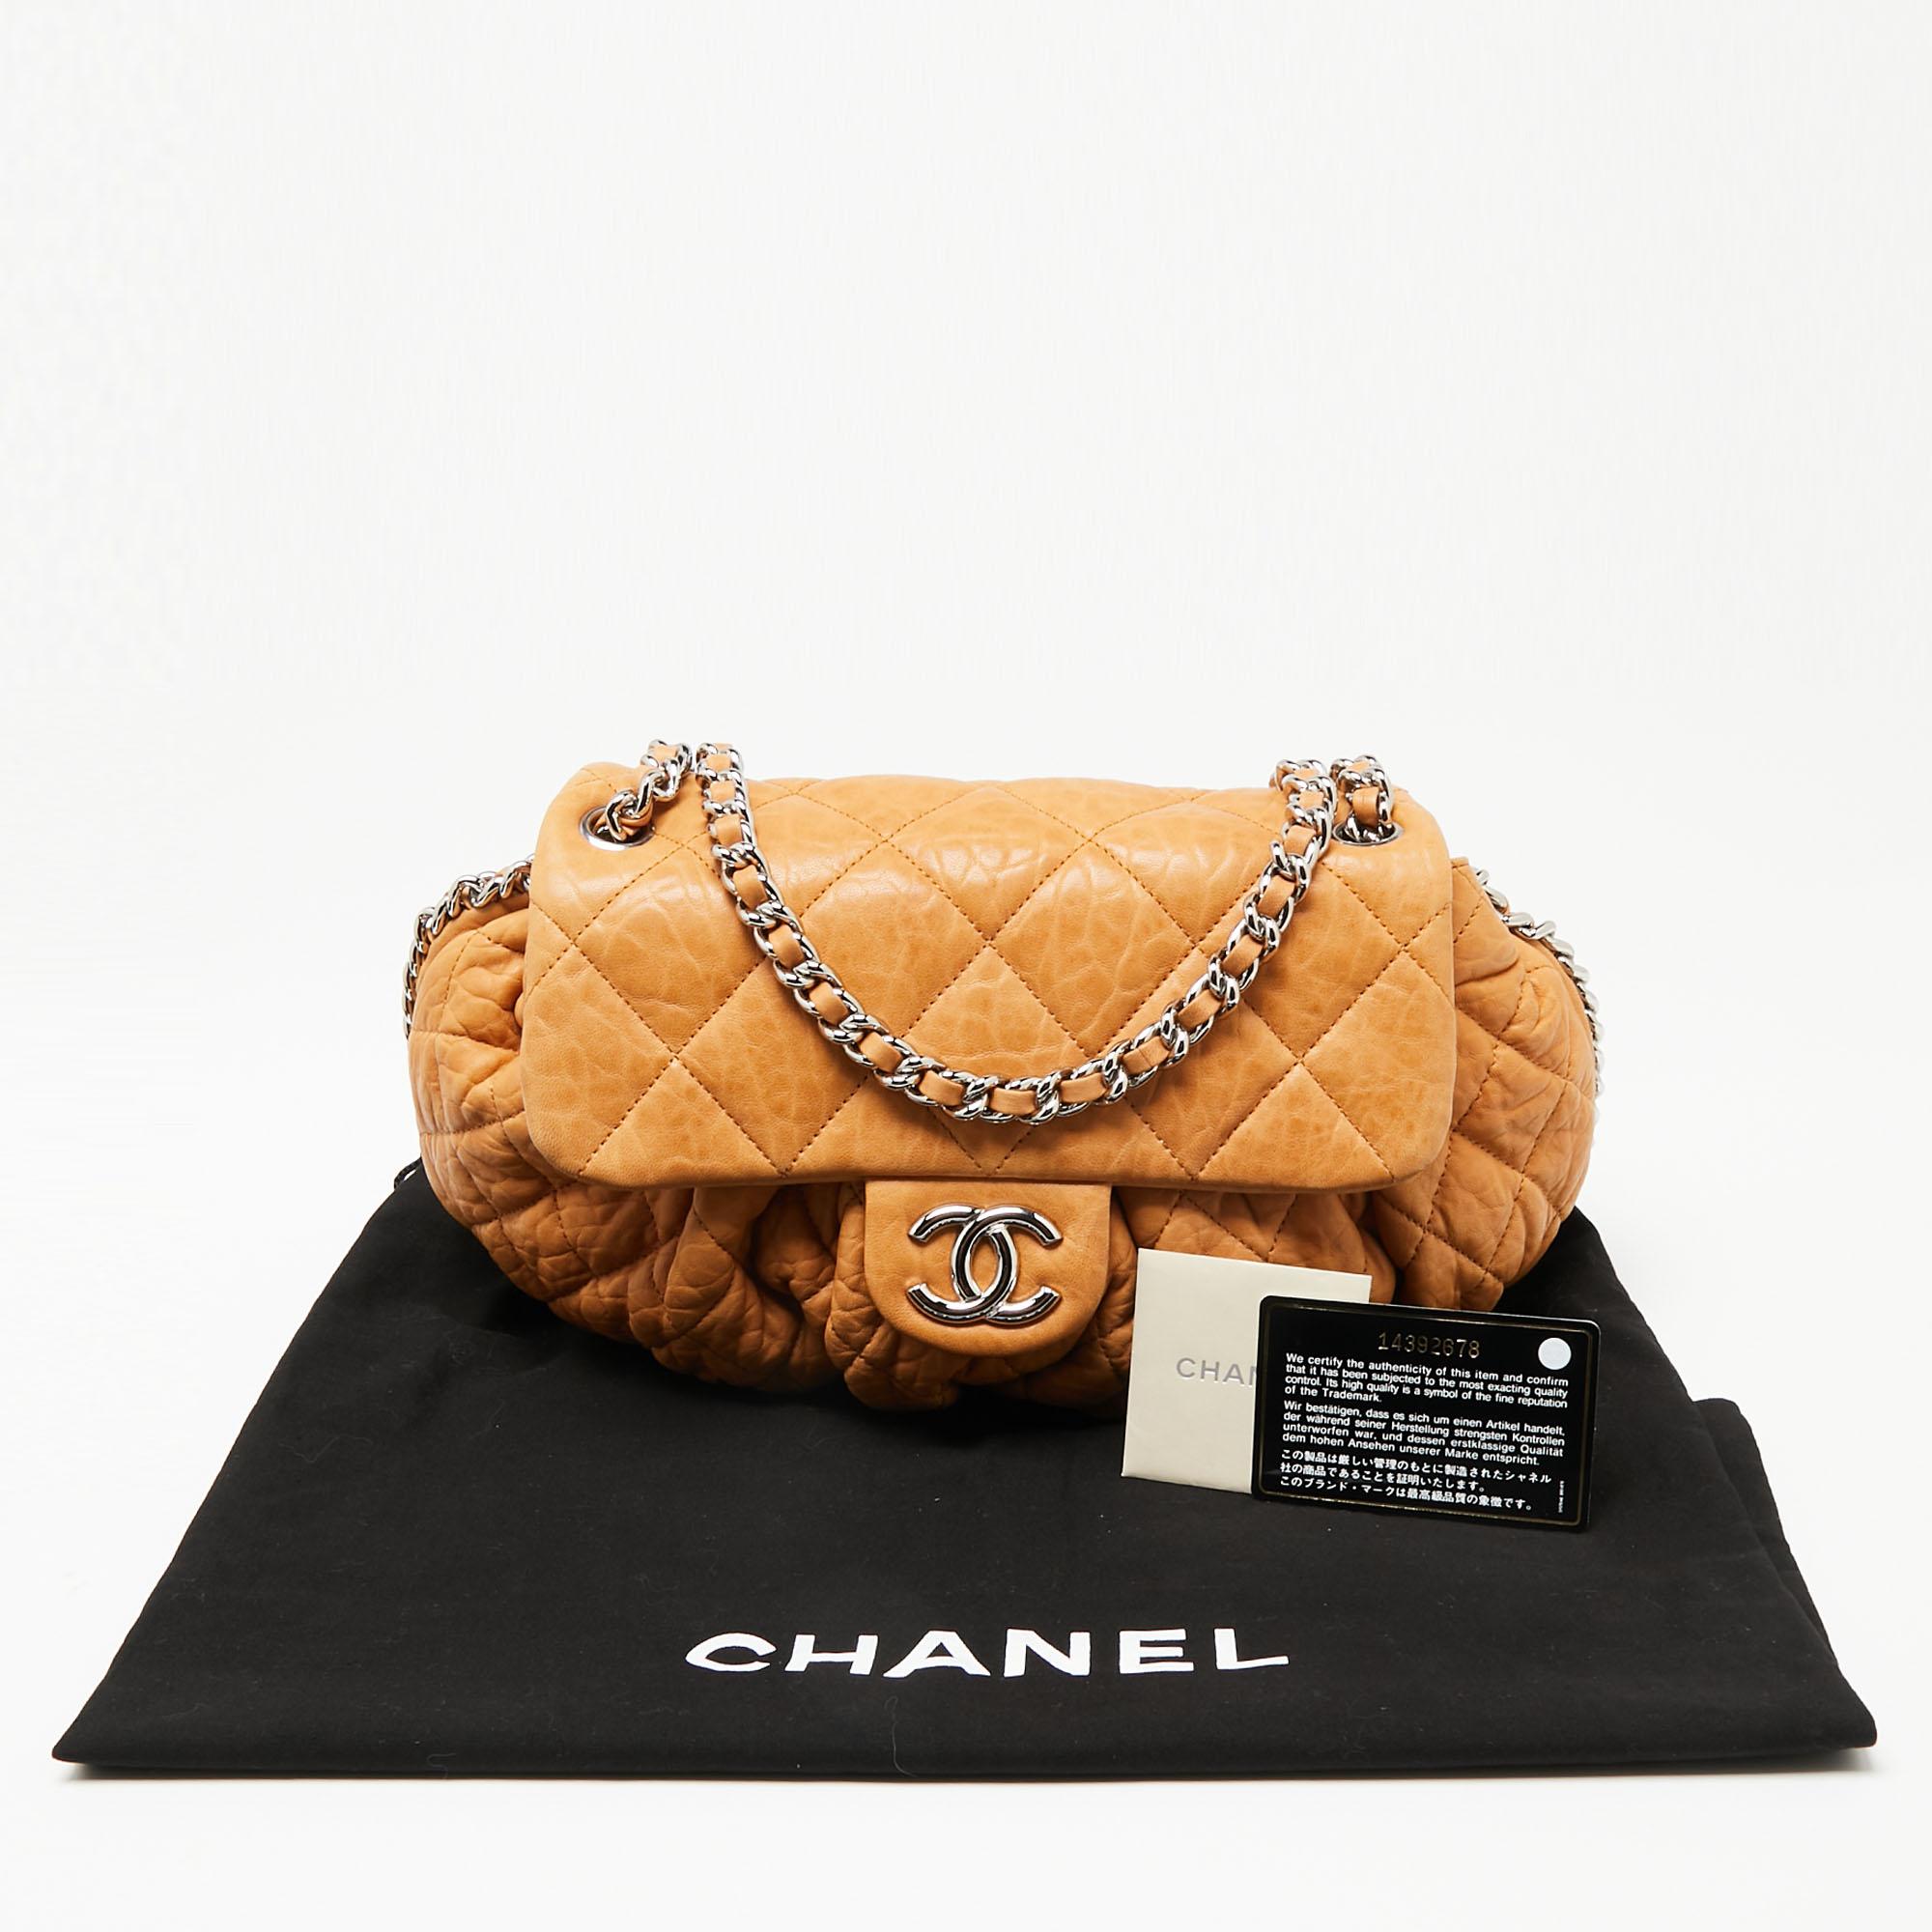 Chanel Tan Quilted Leather Chain Around Shoulder Bag 4